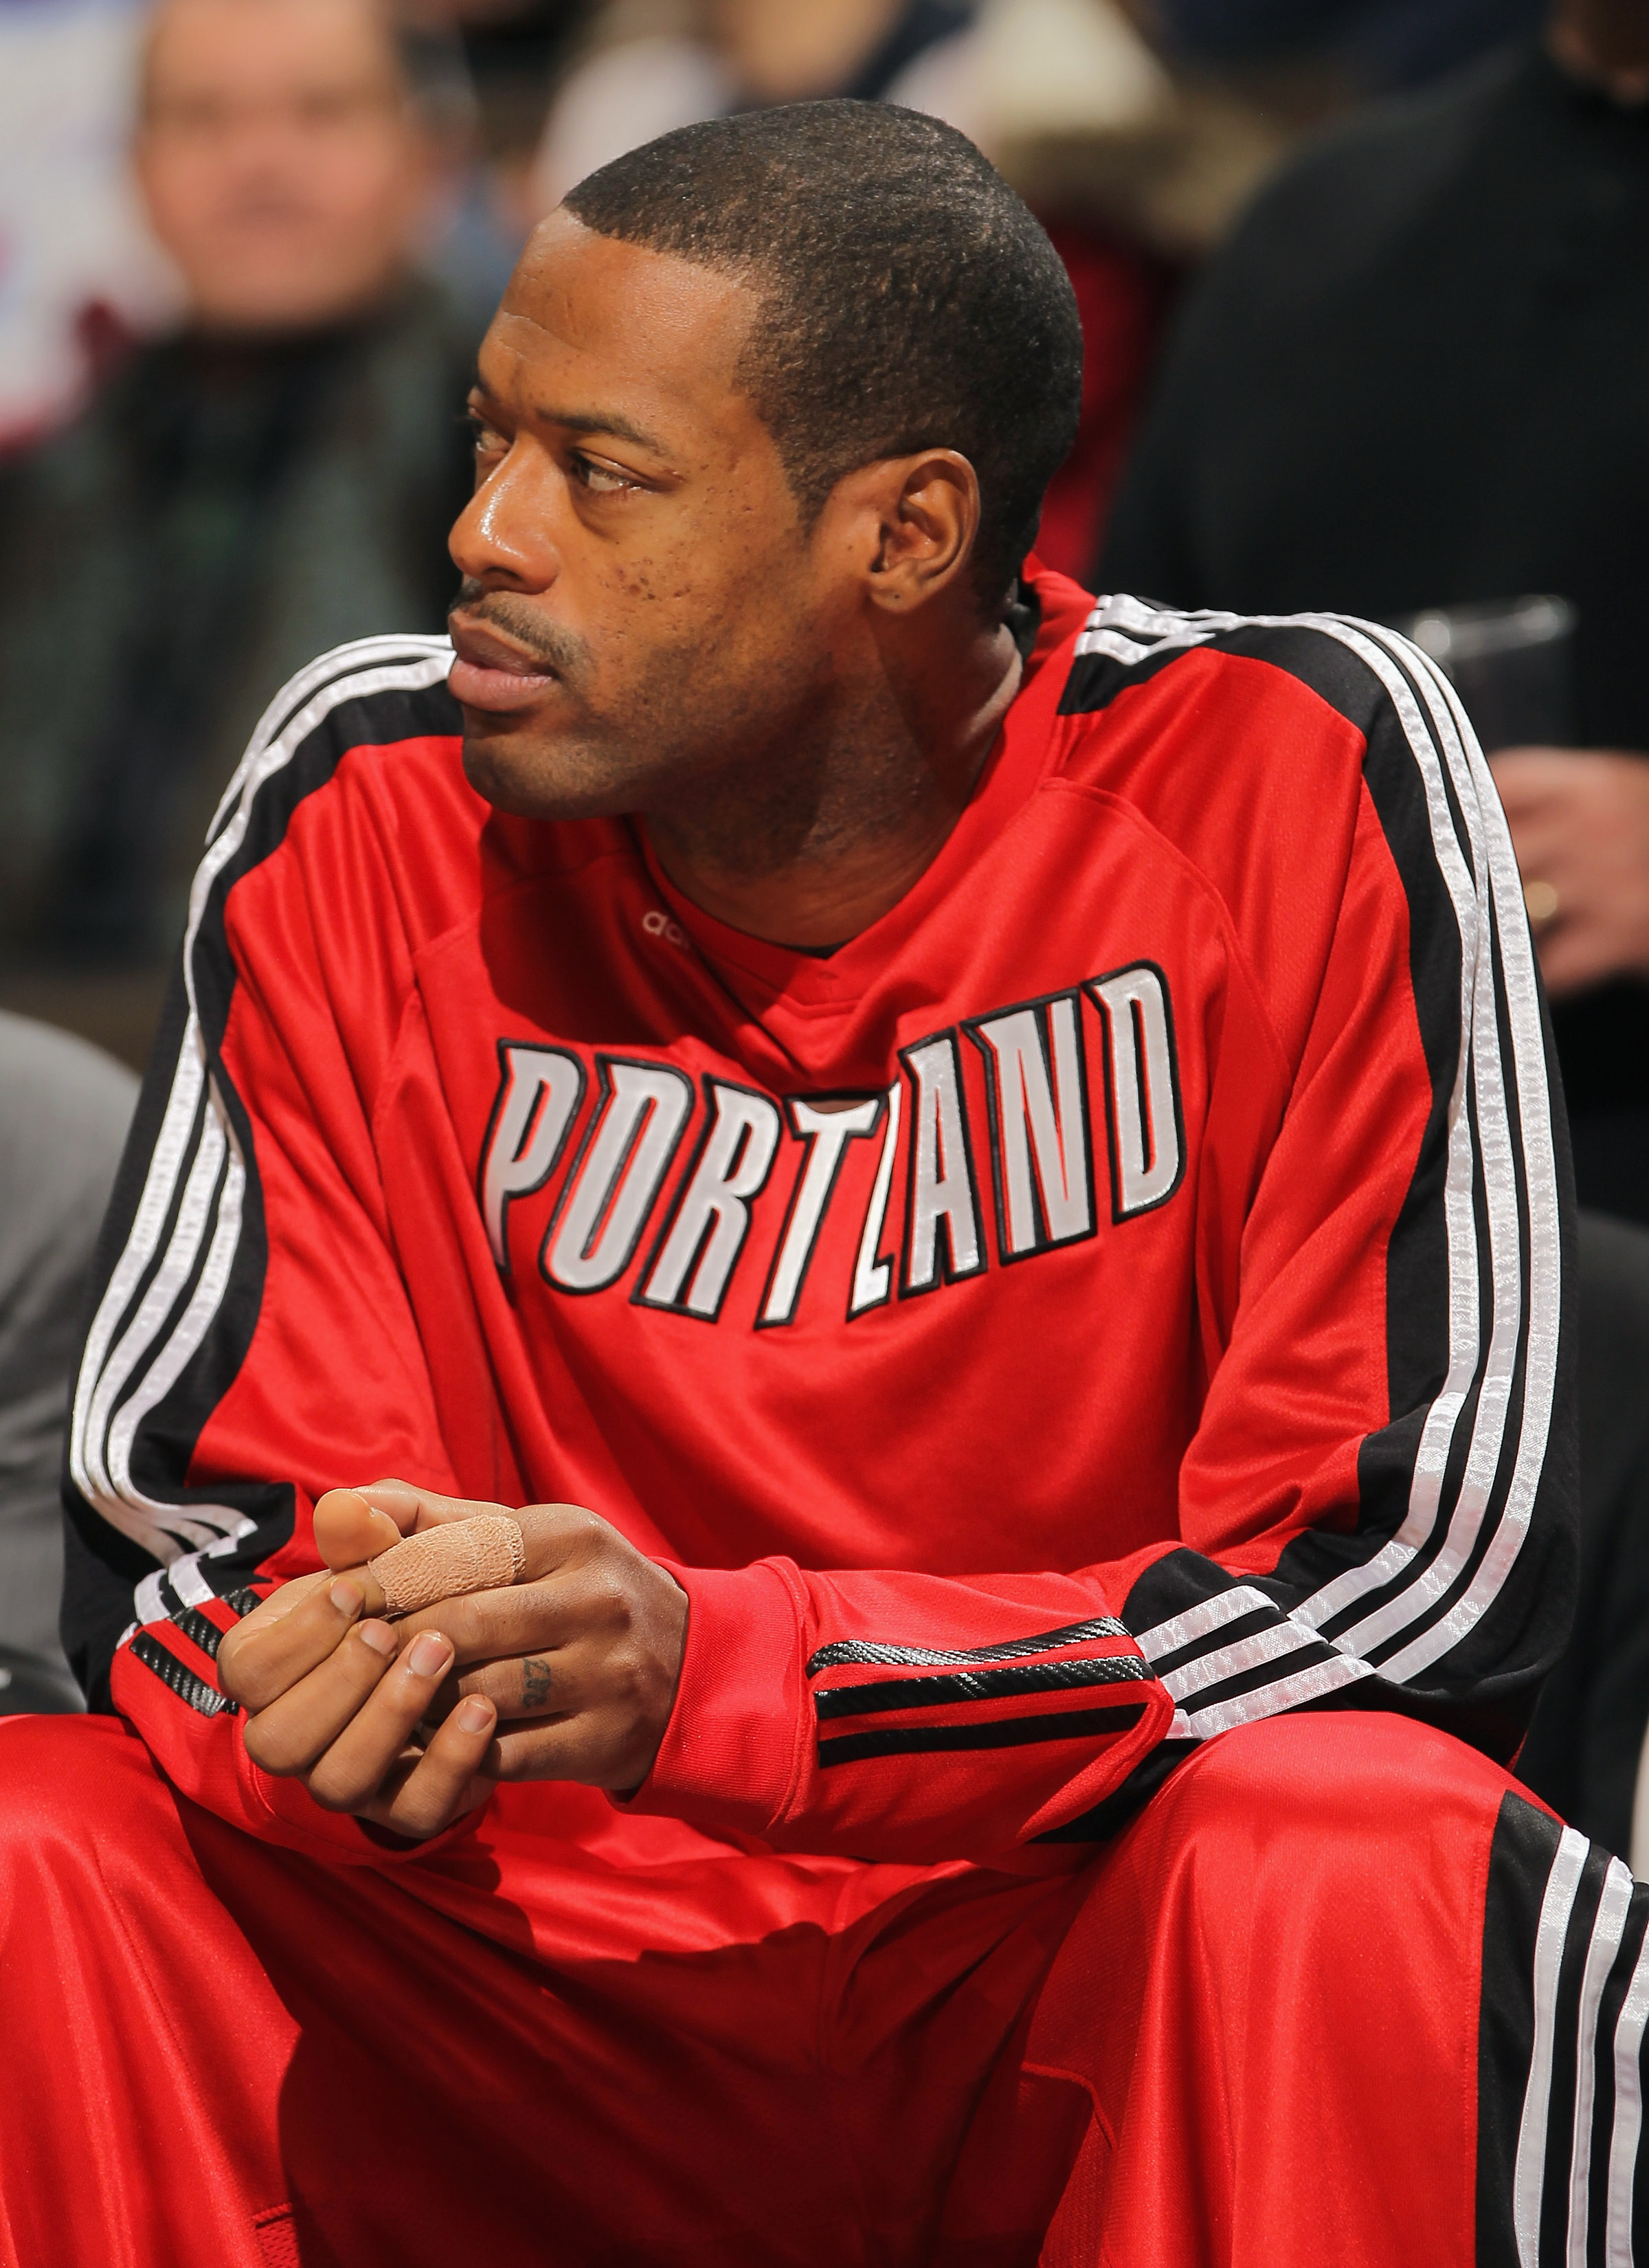 DENVER - DECEMBER 28:  Marcus Camby #23 of the Portland Trail Blazers sits out the game on the bench against the Denver Nuggets at Pepsi Center on December 28, 2010 in Denver, Colorado. The Nuggets defeated the Blazers 95-77. NOTE TO USER: User expressly